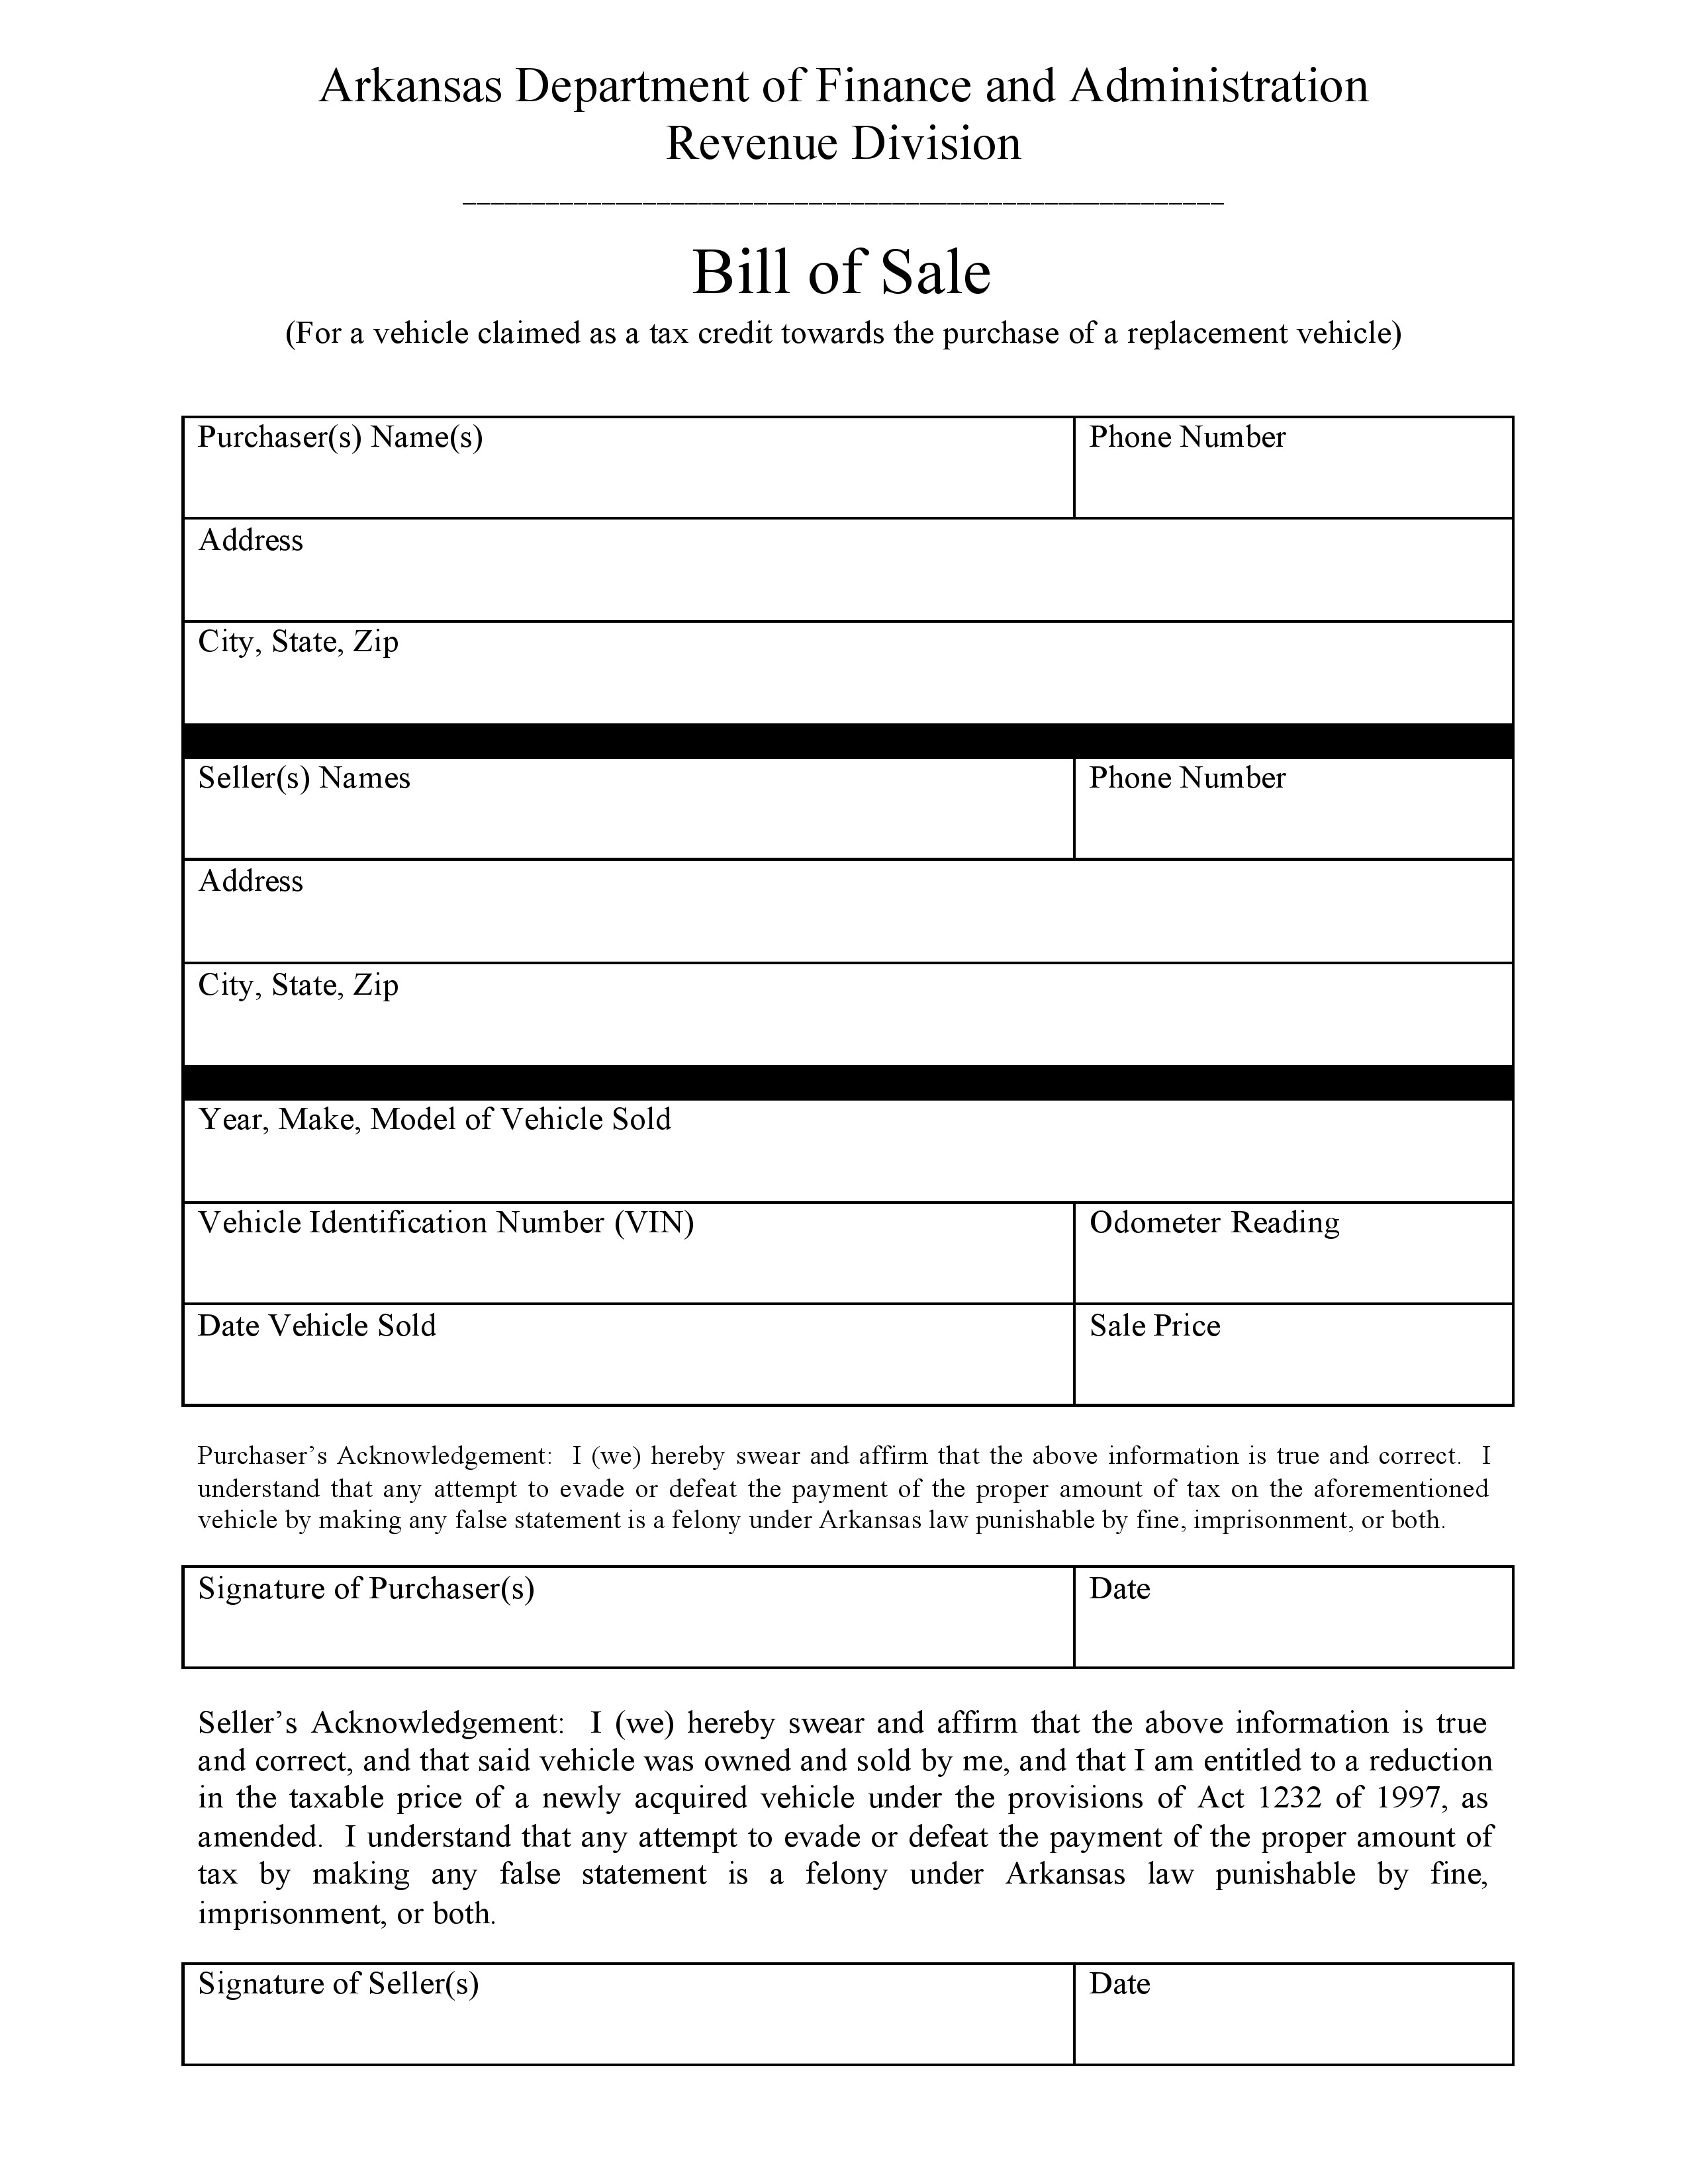 arkansas-department-of-finance-and-administration-bill-of-sale-businesser